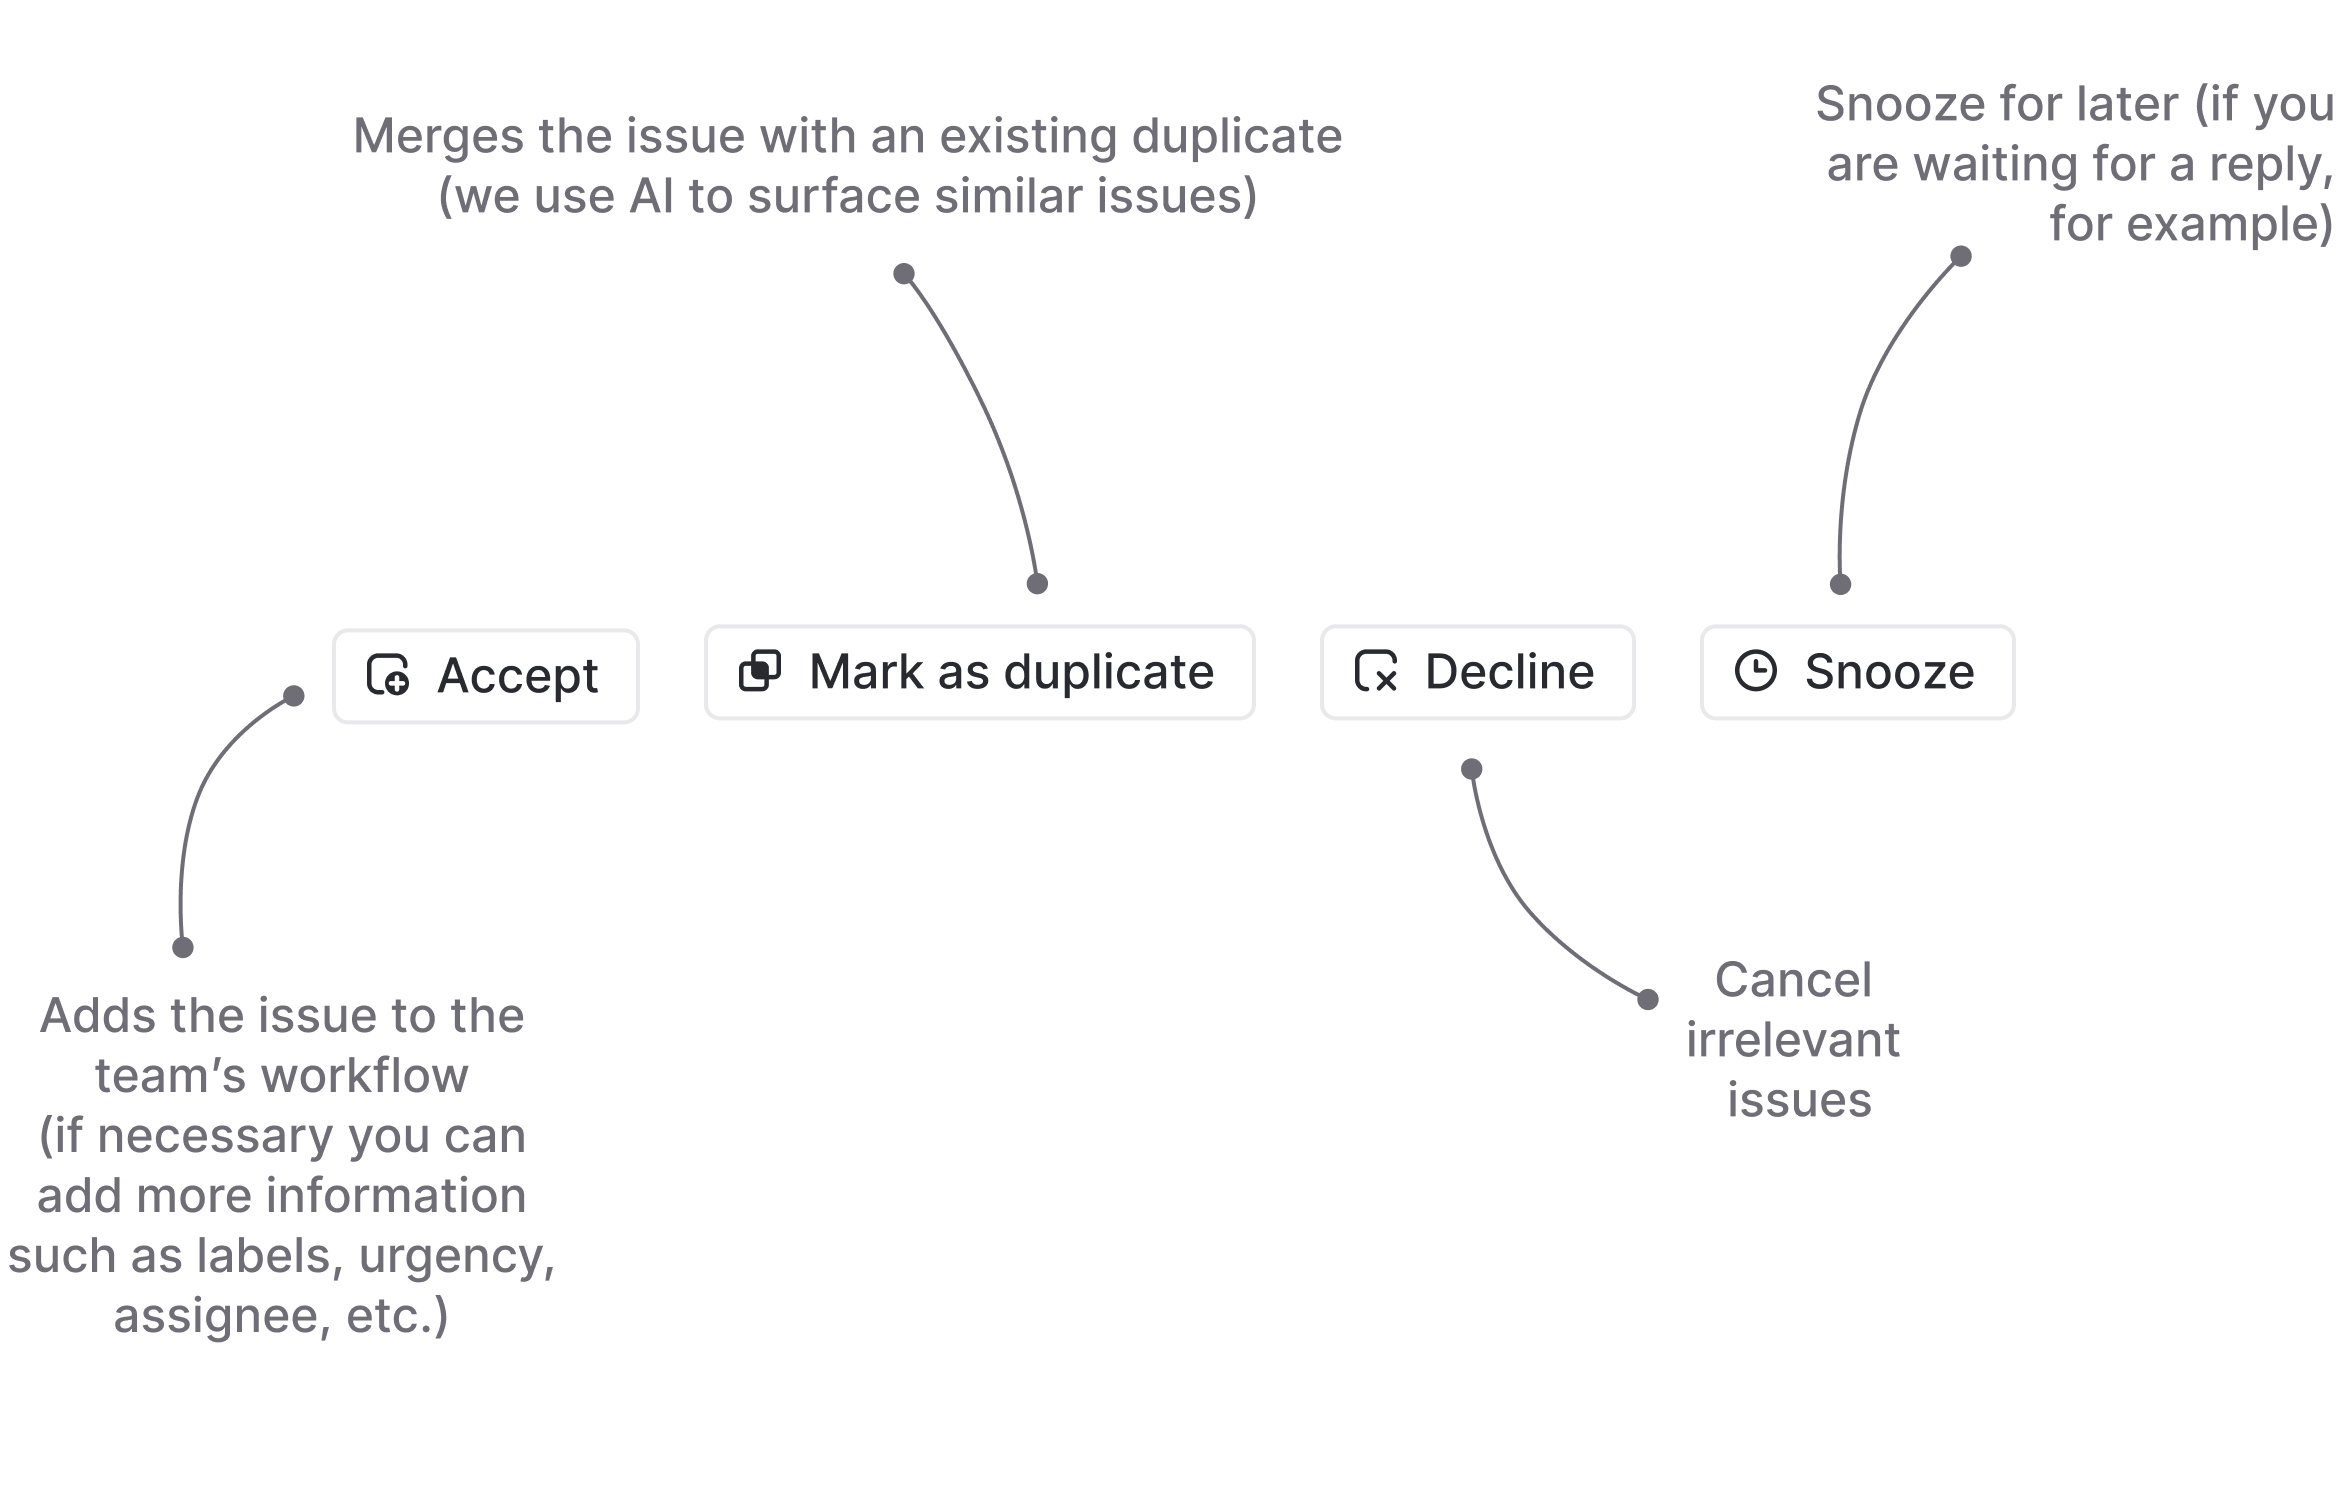 A screenshot of the 4 different controls in the Linear Triage inbox: Accept, Mark as duplicate, Decline, and Snooze